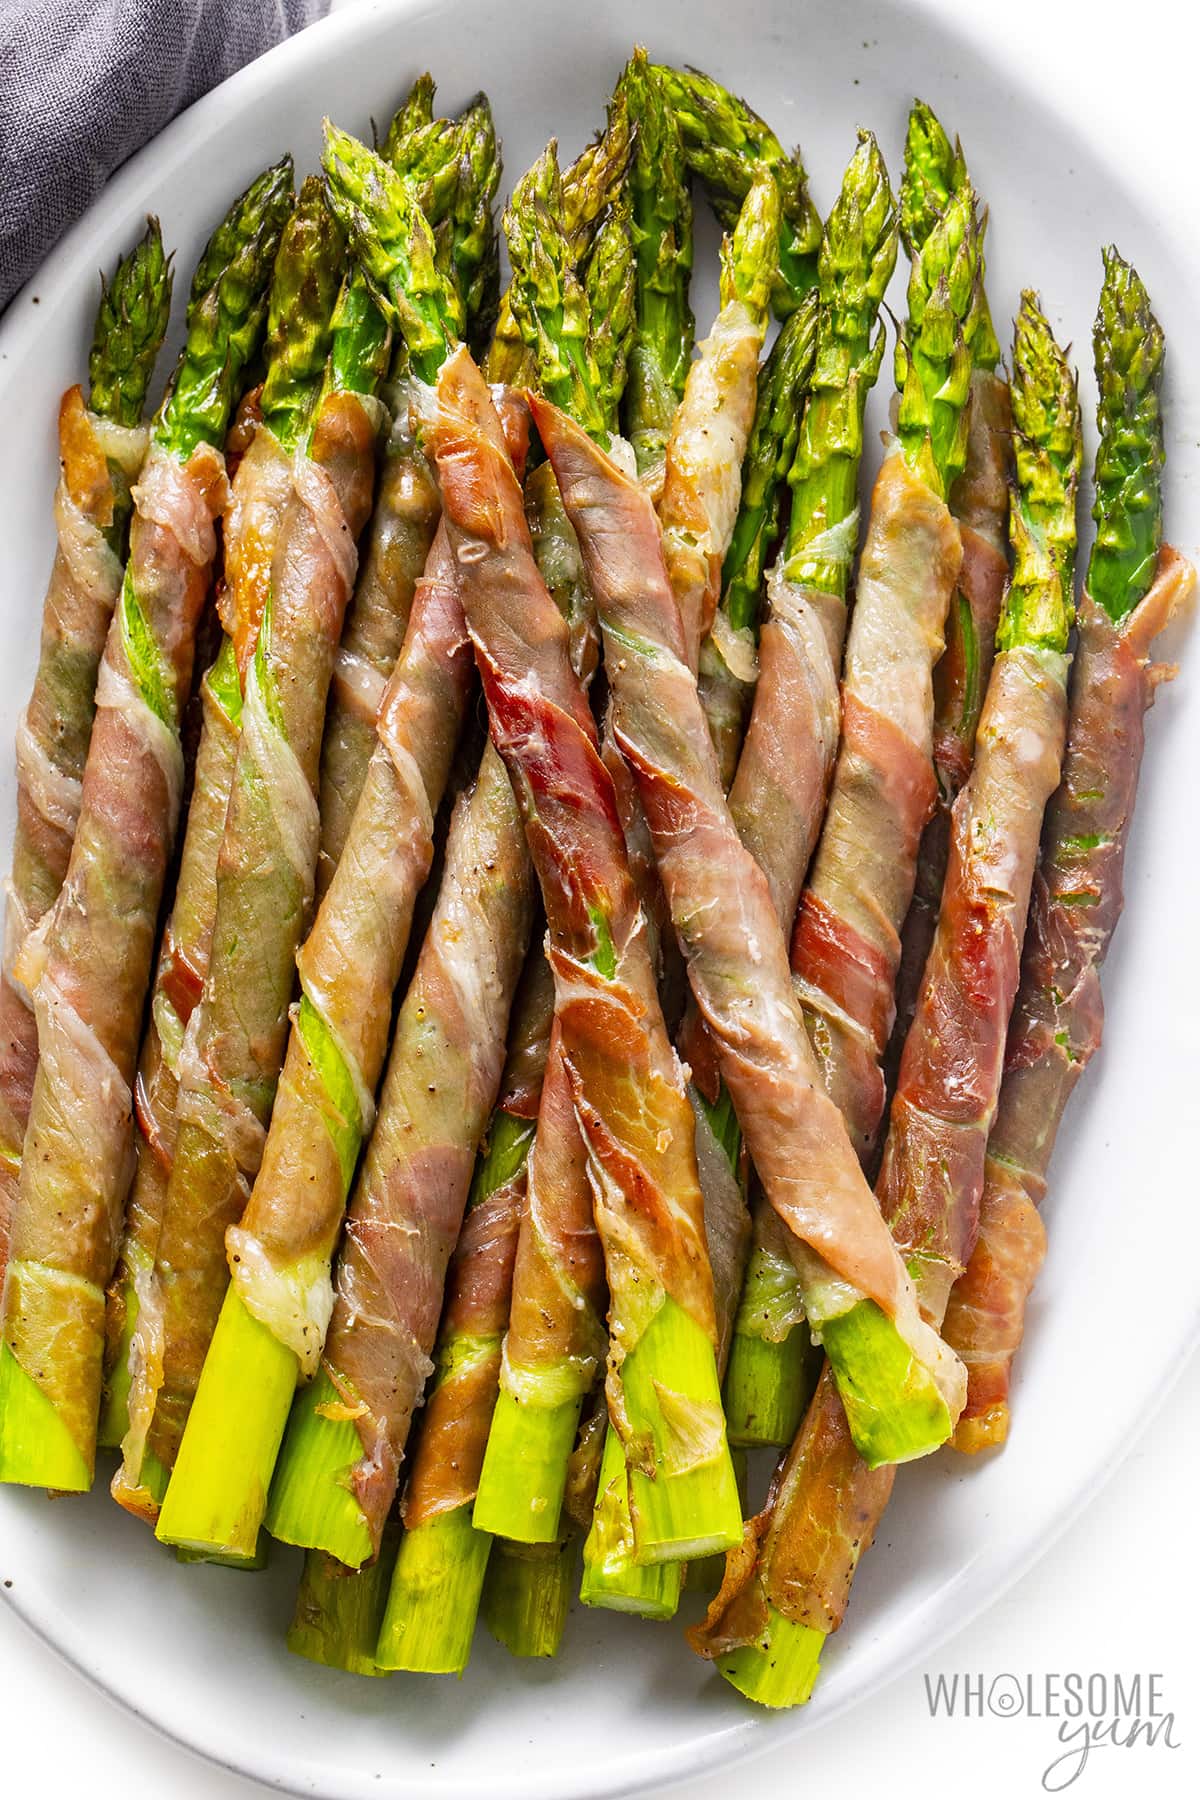 Prosciutto wrapped asparagus spears on a platter.